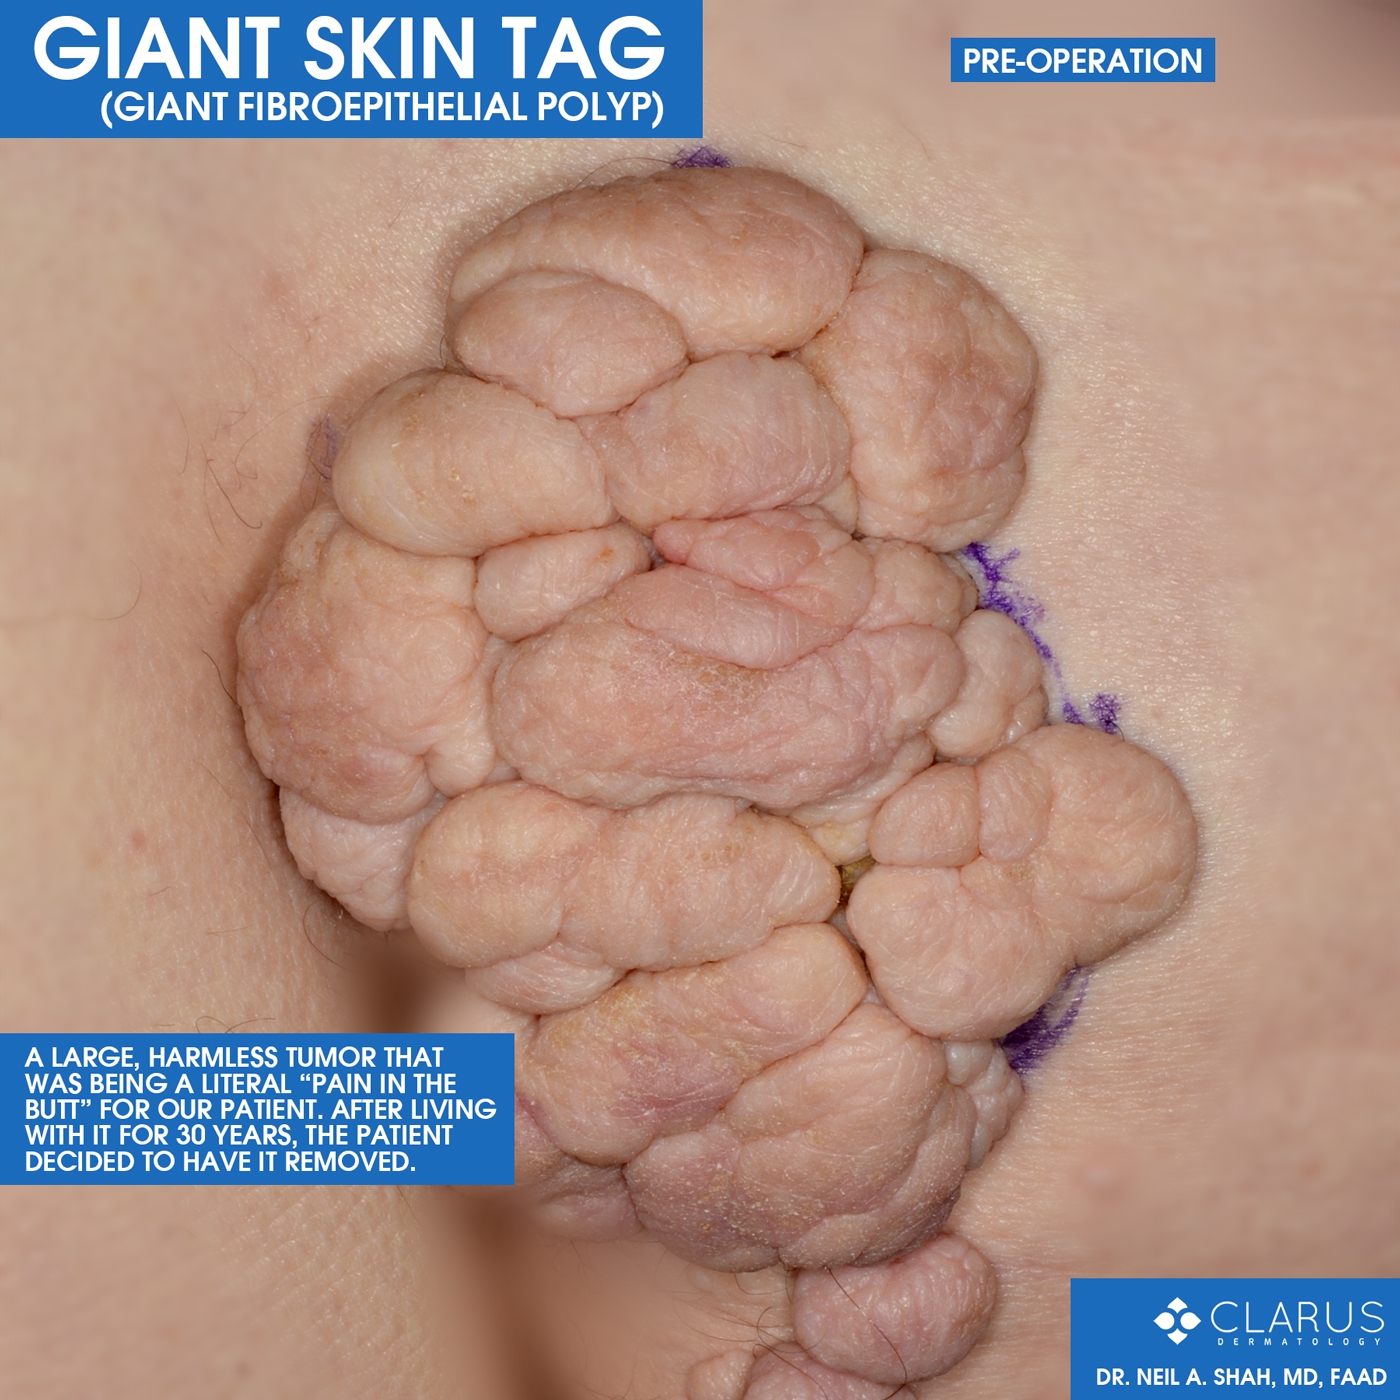 The images are from a patient that board-certified dermatologist Dr. Neil Shah recently saw here at Clarus Dermatology. The large, harmless tumor was determined to most likely be a giant skin tag, known formally as a giant fibroepithelial polyp.